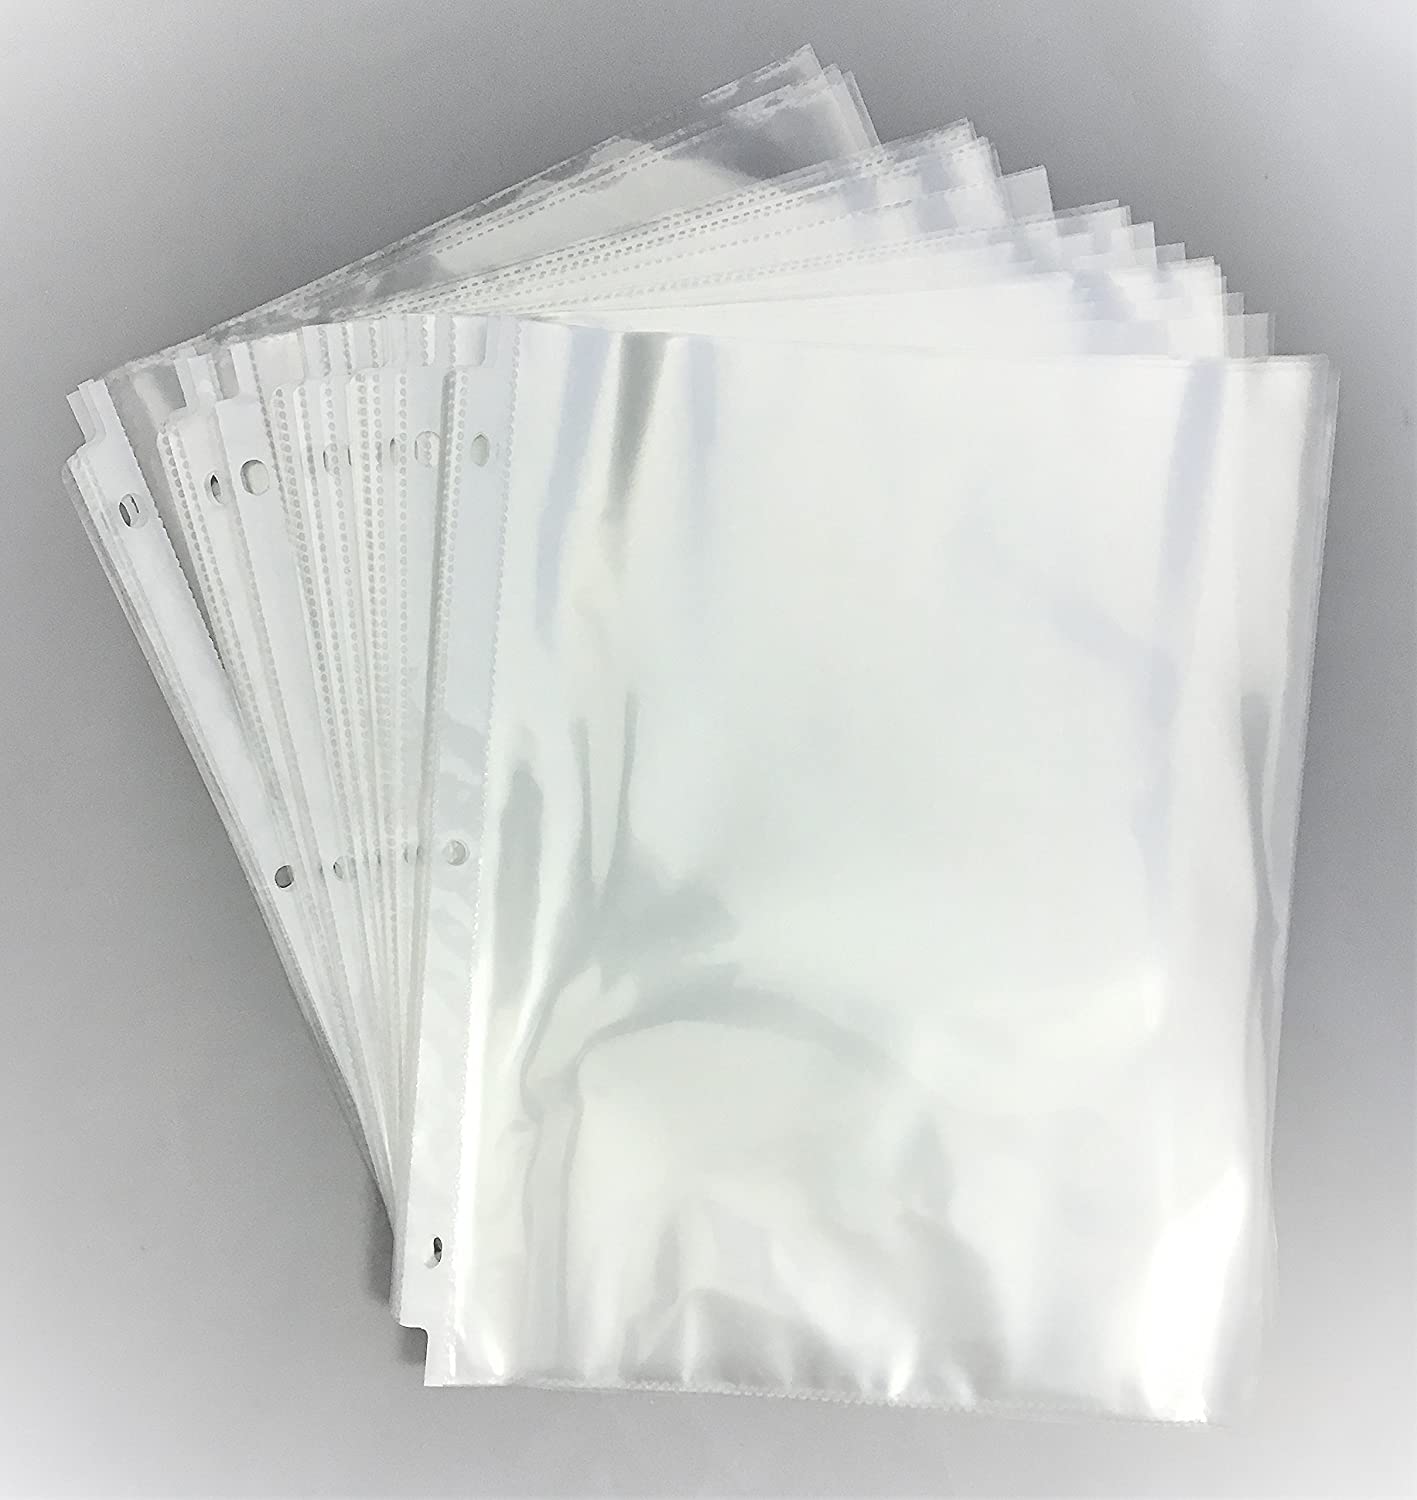 Heavy Duty Recipe Protectors, Holds Standard 8.5" x 11" Paper - 30 Pack